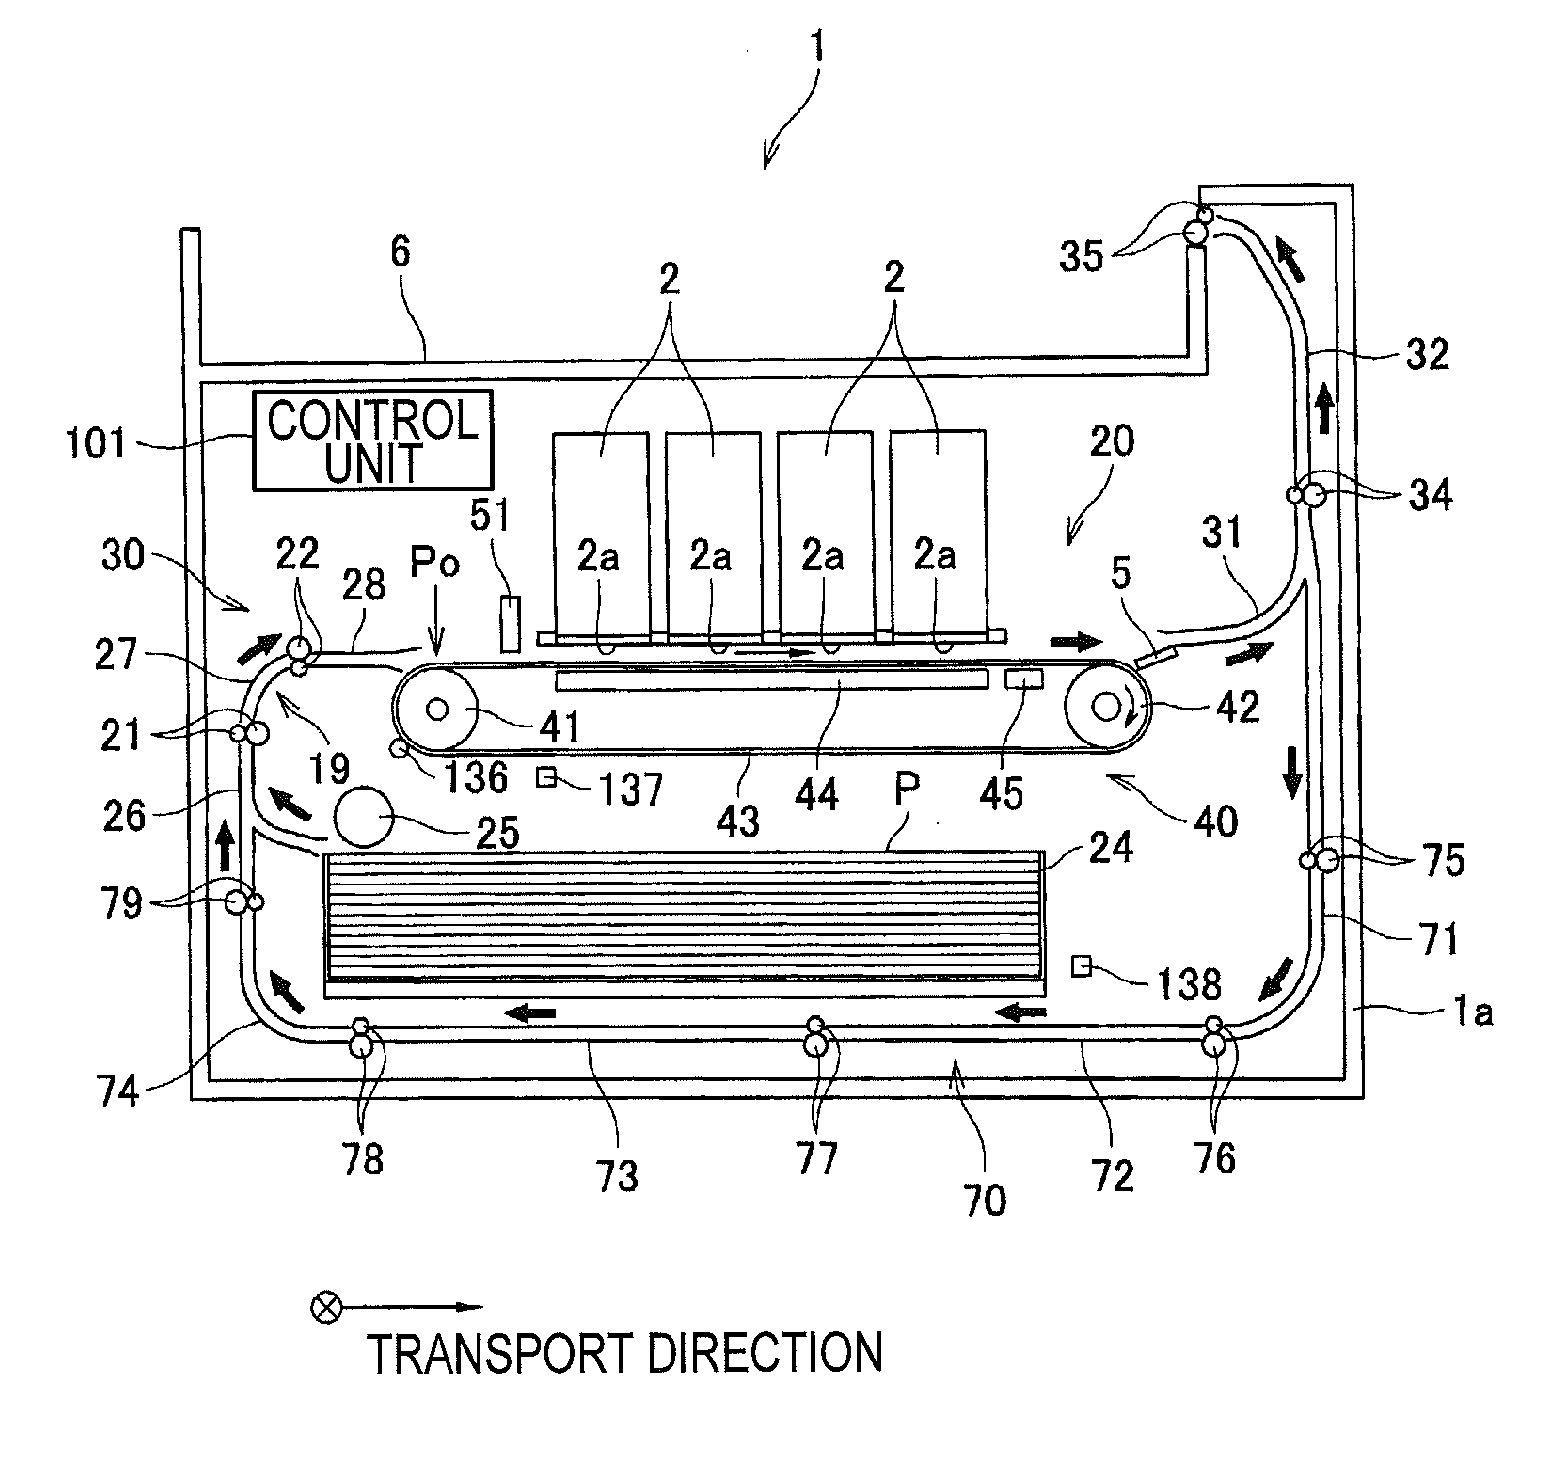 Transport device and recording device